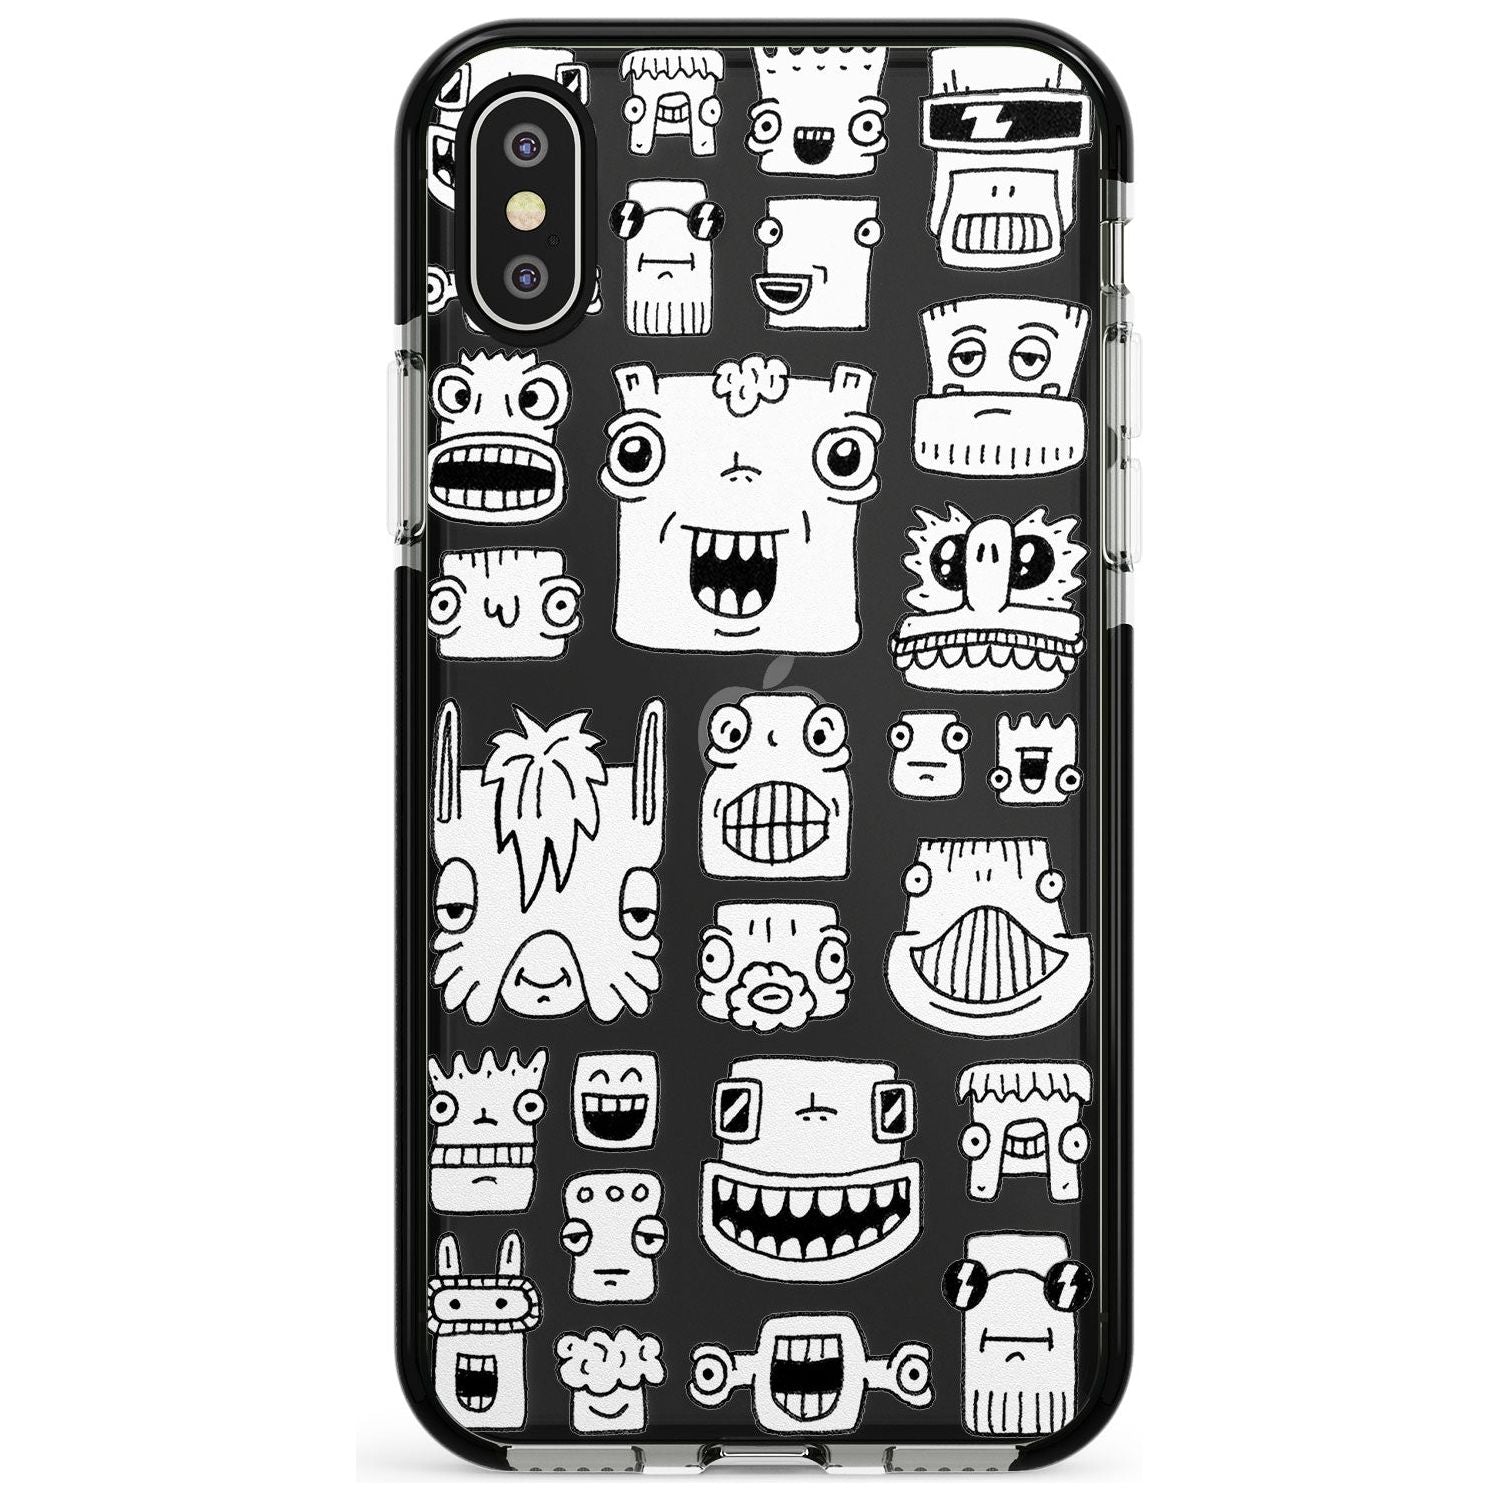 Burst Heads Black Impact Phone Case for iPhone X XS Max XR